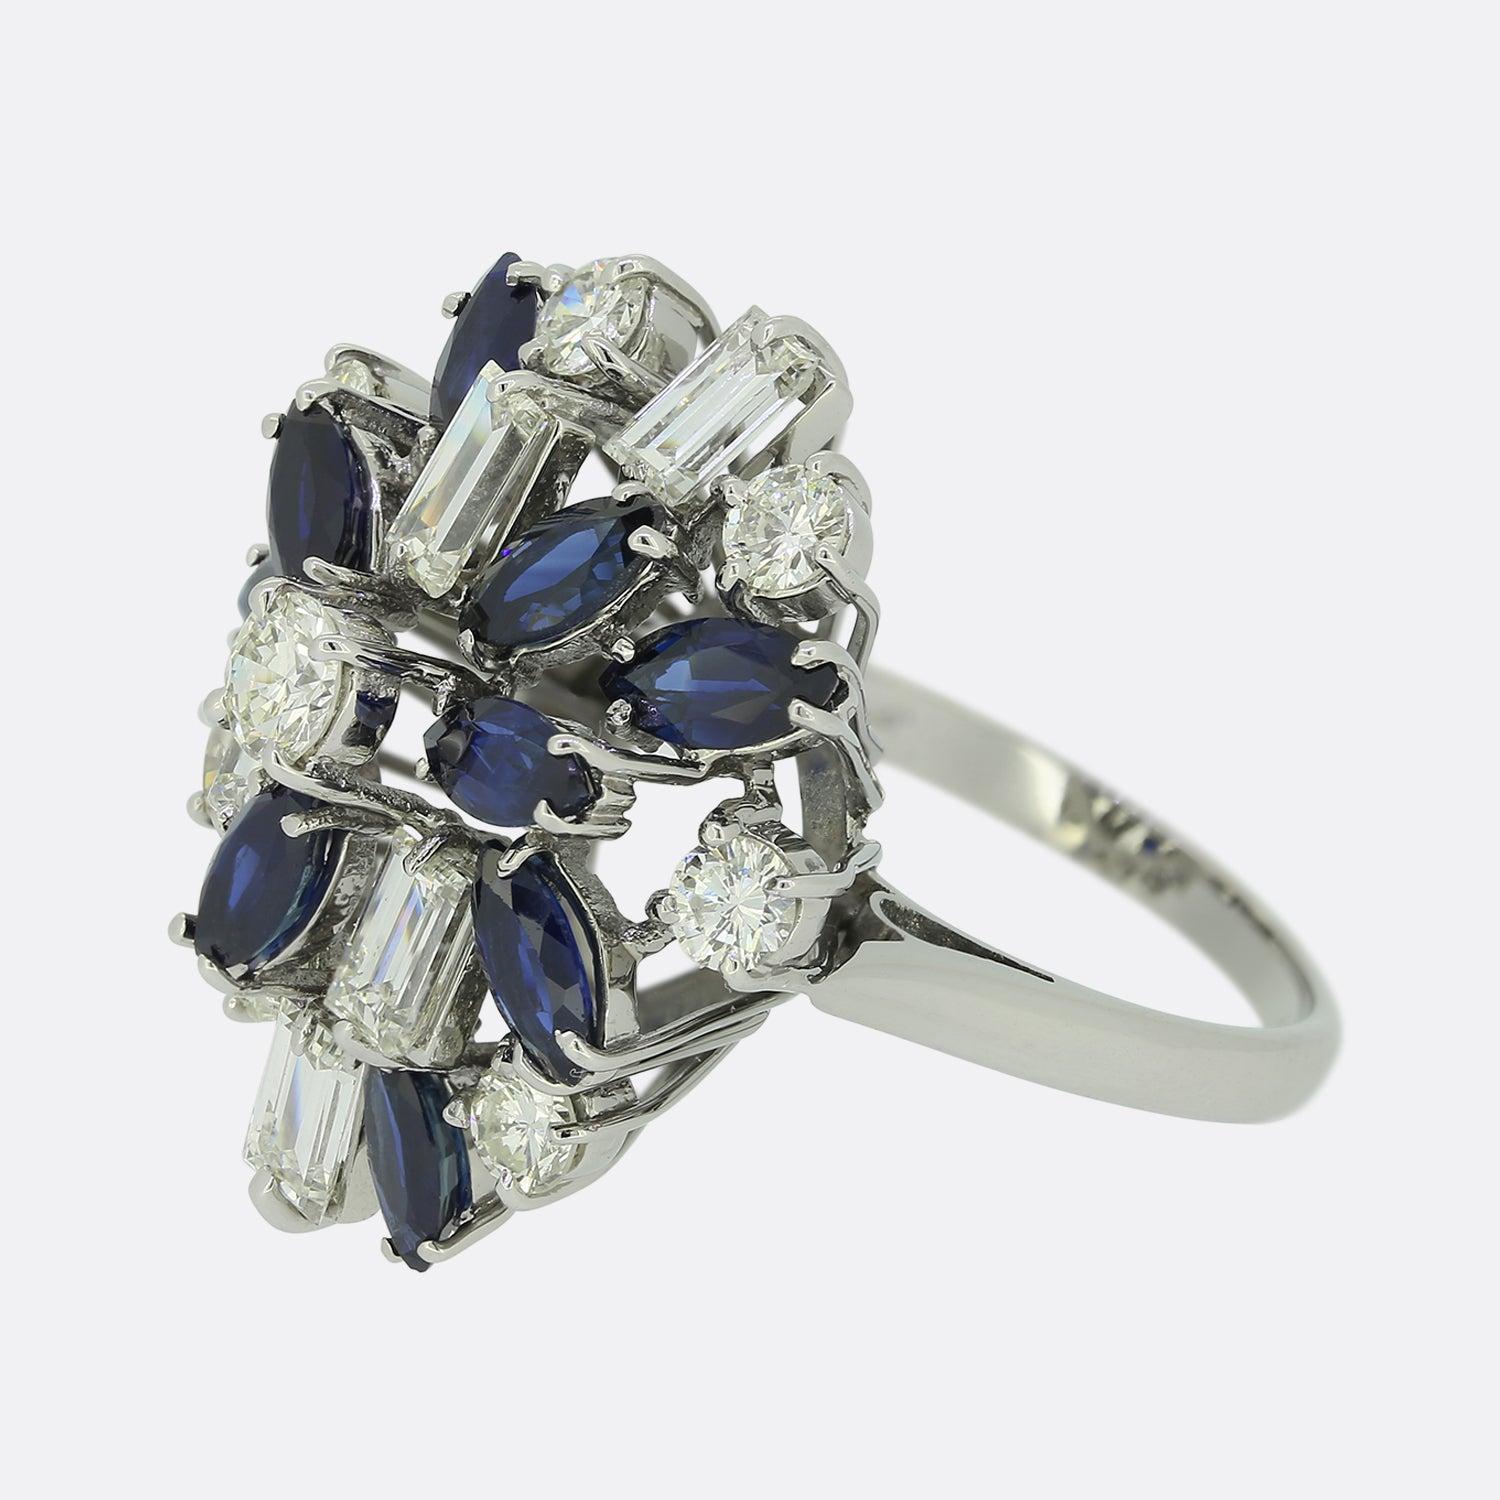 Here we have a delightful vintage sapphire and diamond cocktail ring. The ring features a sporadic array of gemstones including marquise shaped sapphires possessing a wonderfully rich royal blue colour tone. These natural stones are complimented by